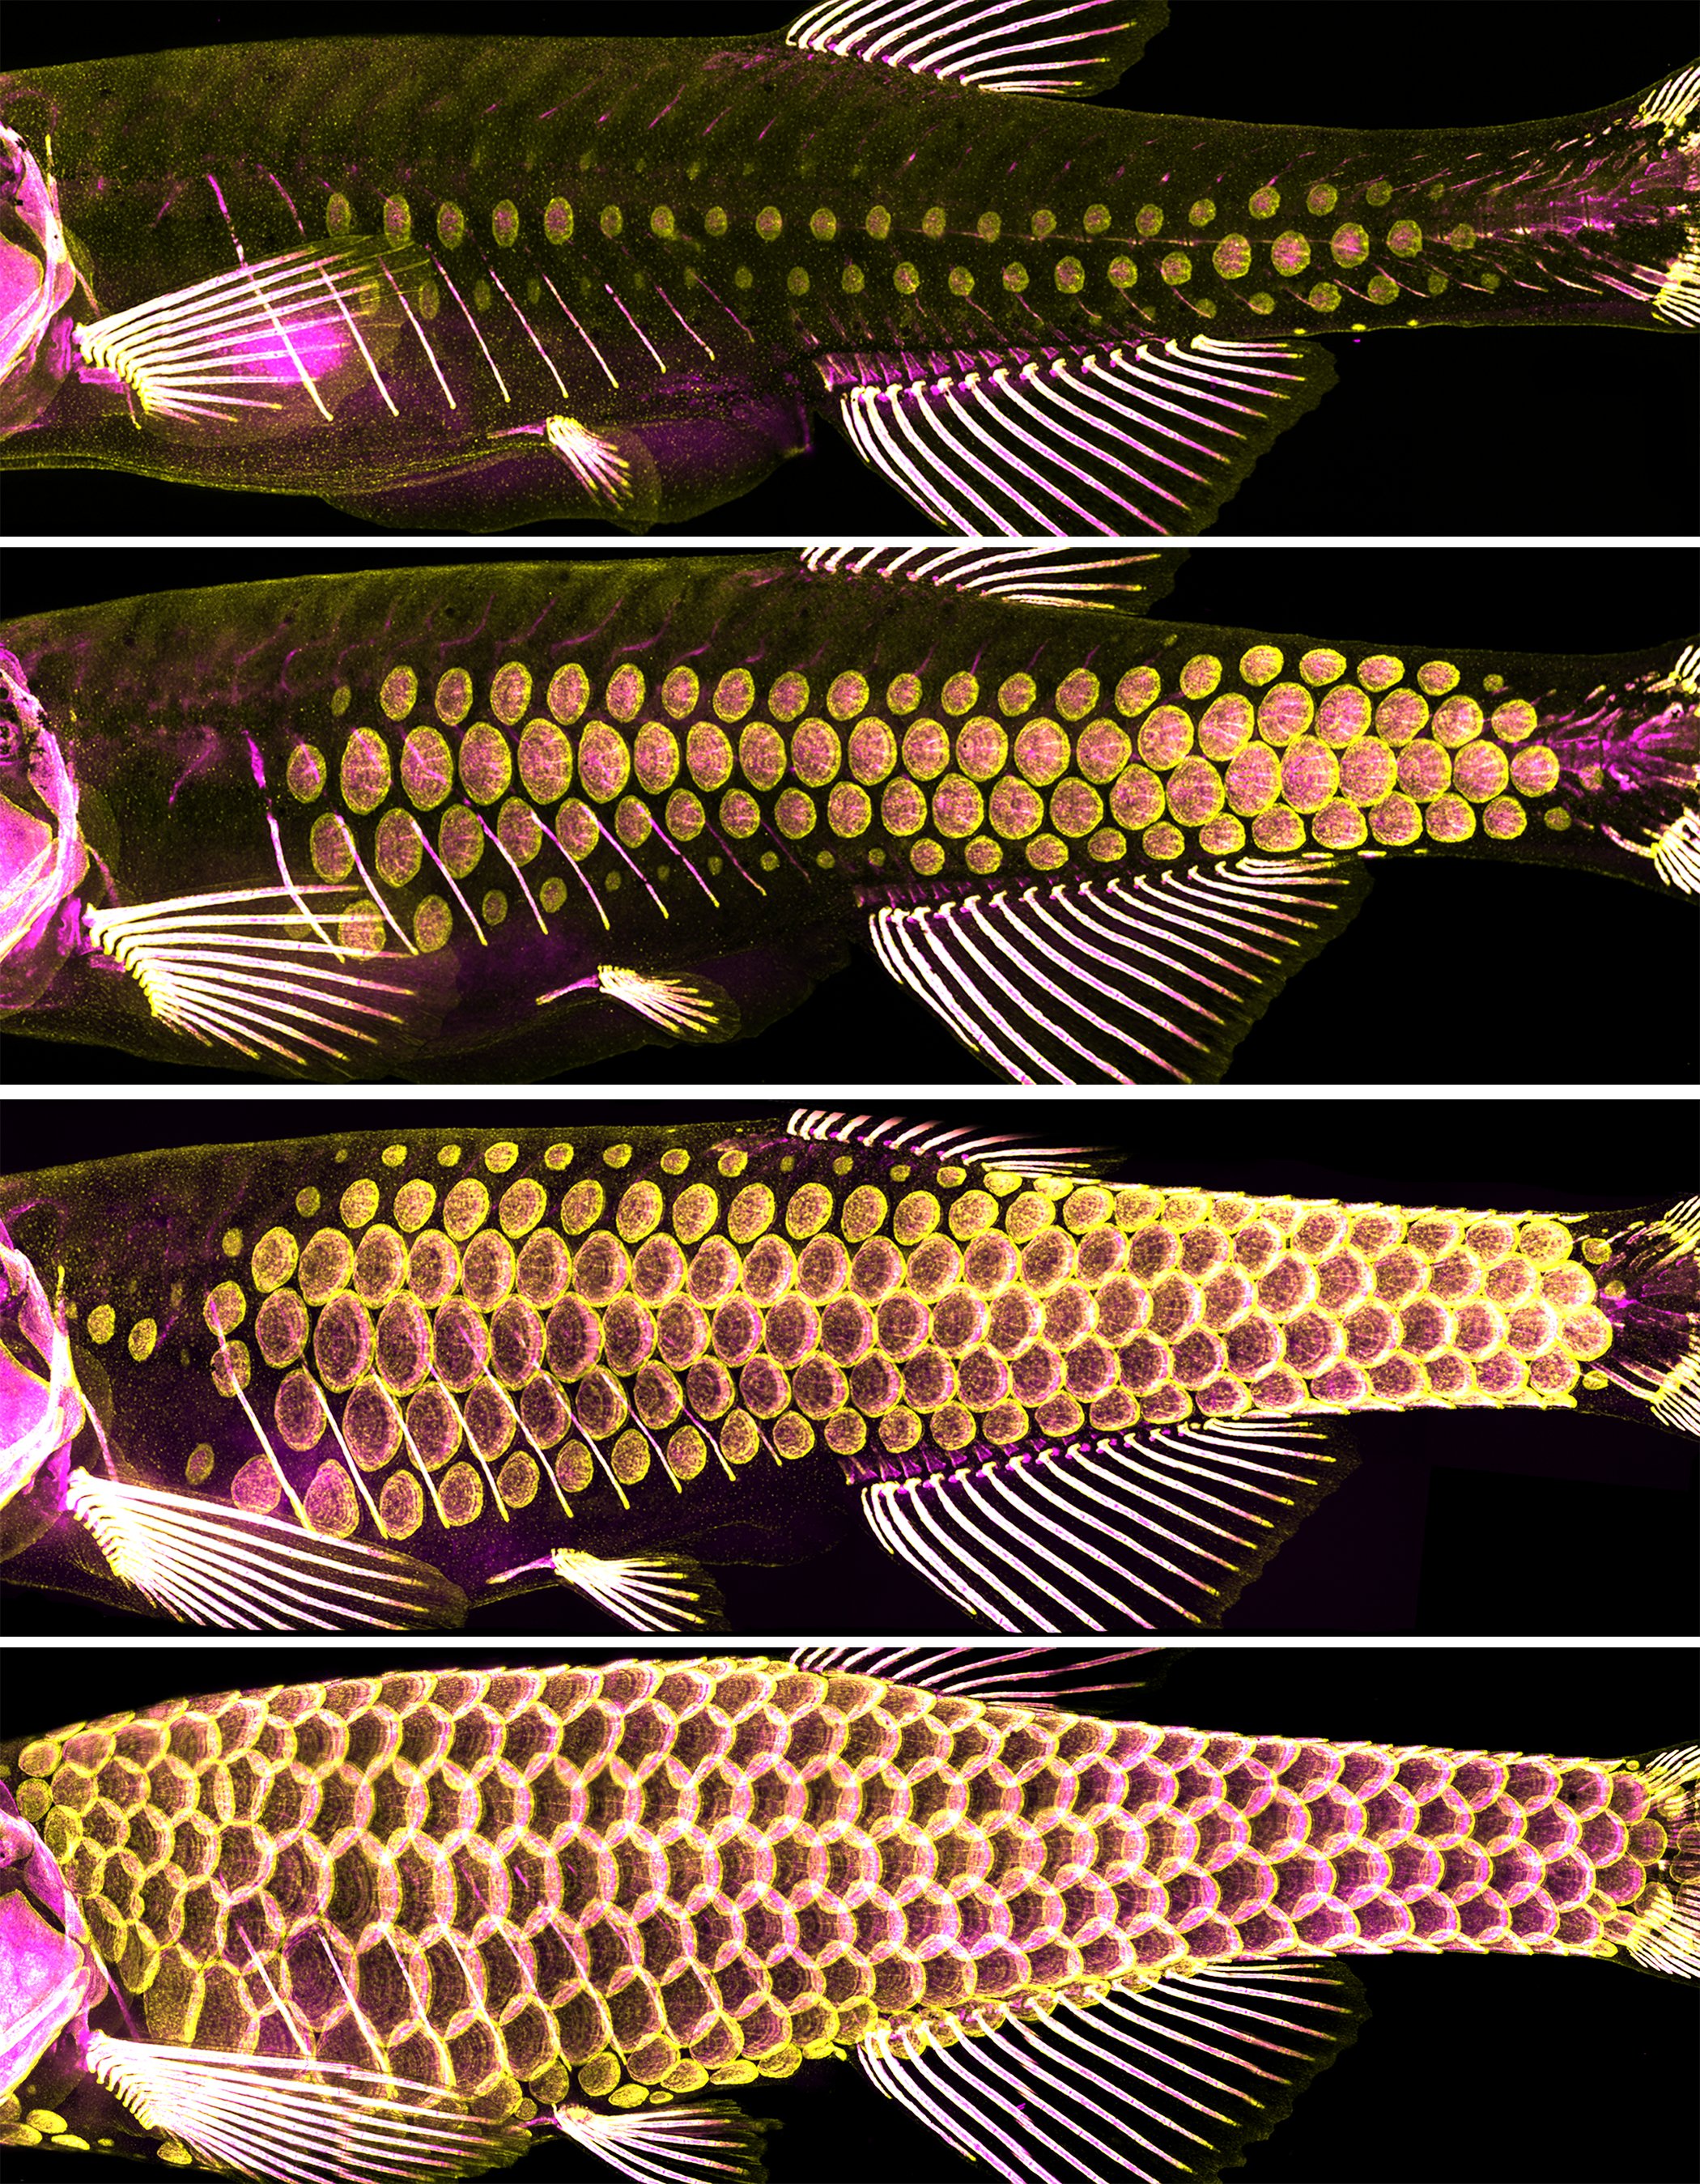 The ancient armor of fish—scales—provide clues to hair, feather